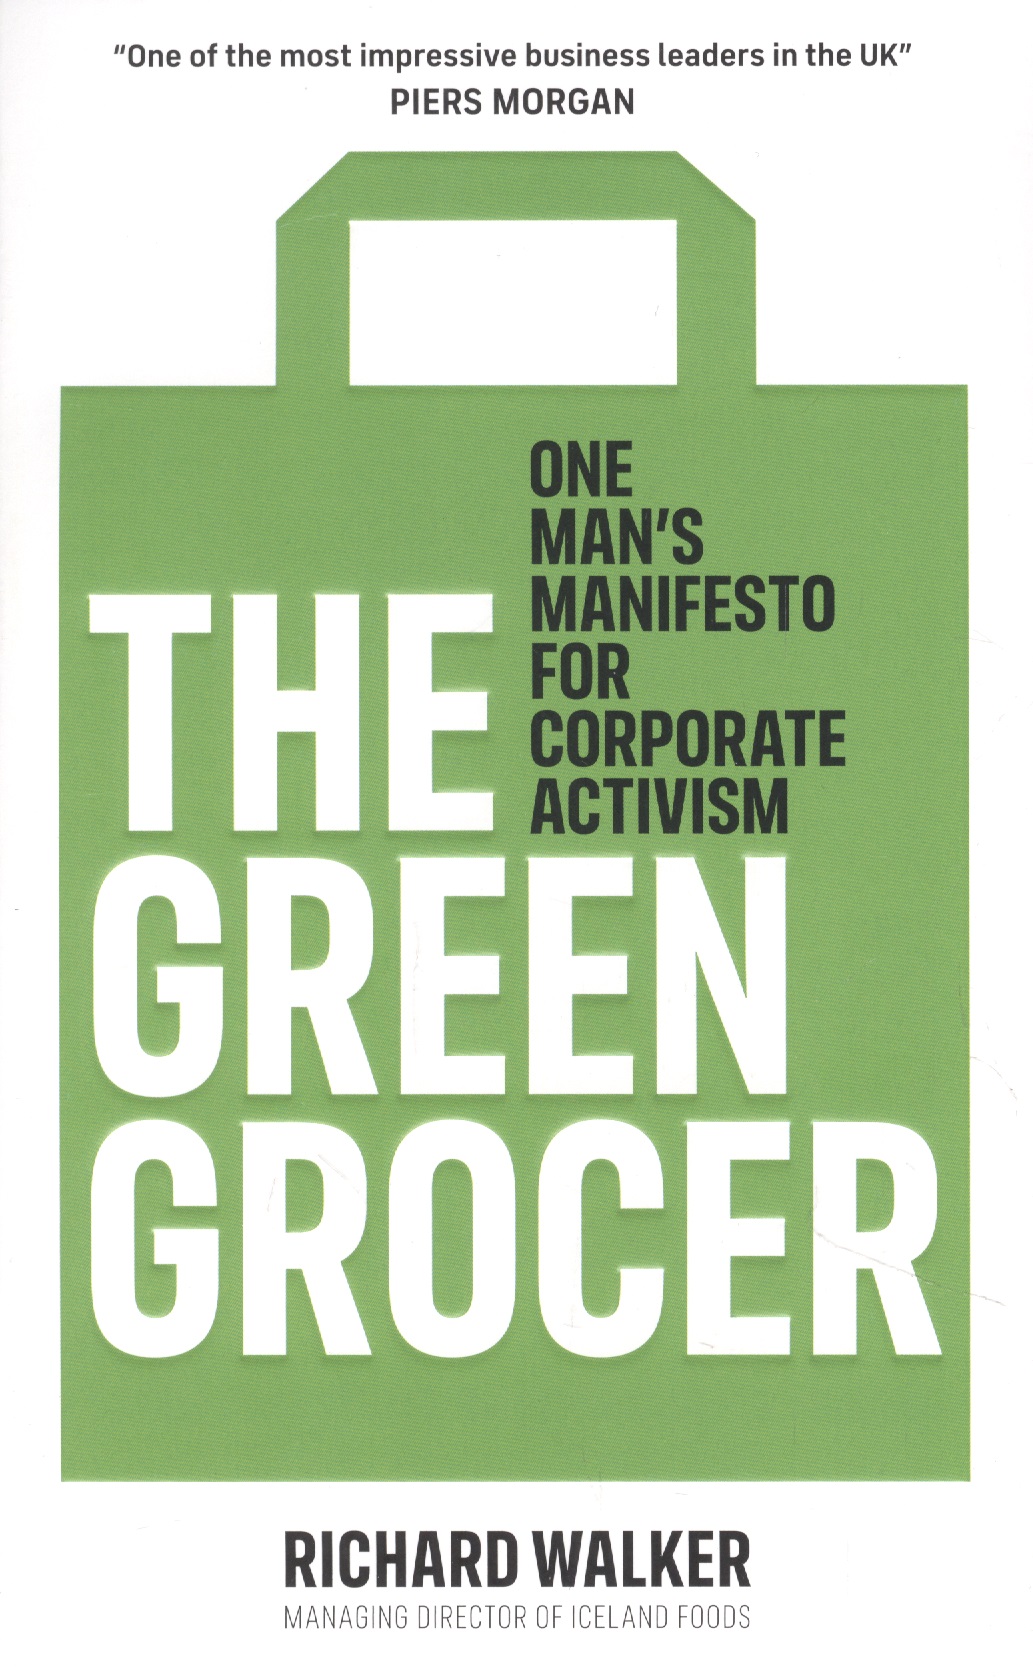 The Green Grocer. One Mans Manifesto for Corporate Activism walker r the green grocer one mans manifesto for corporate activism